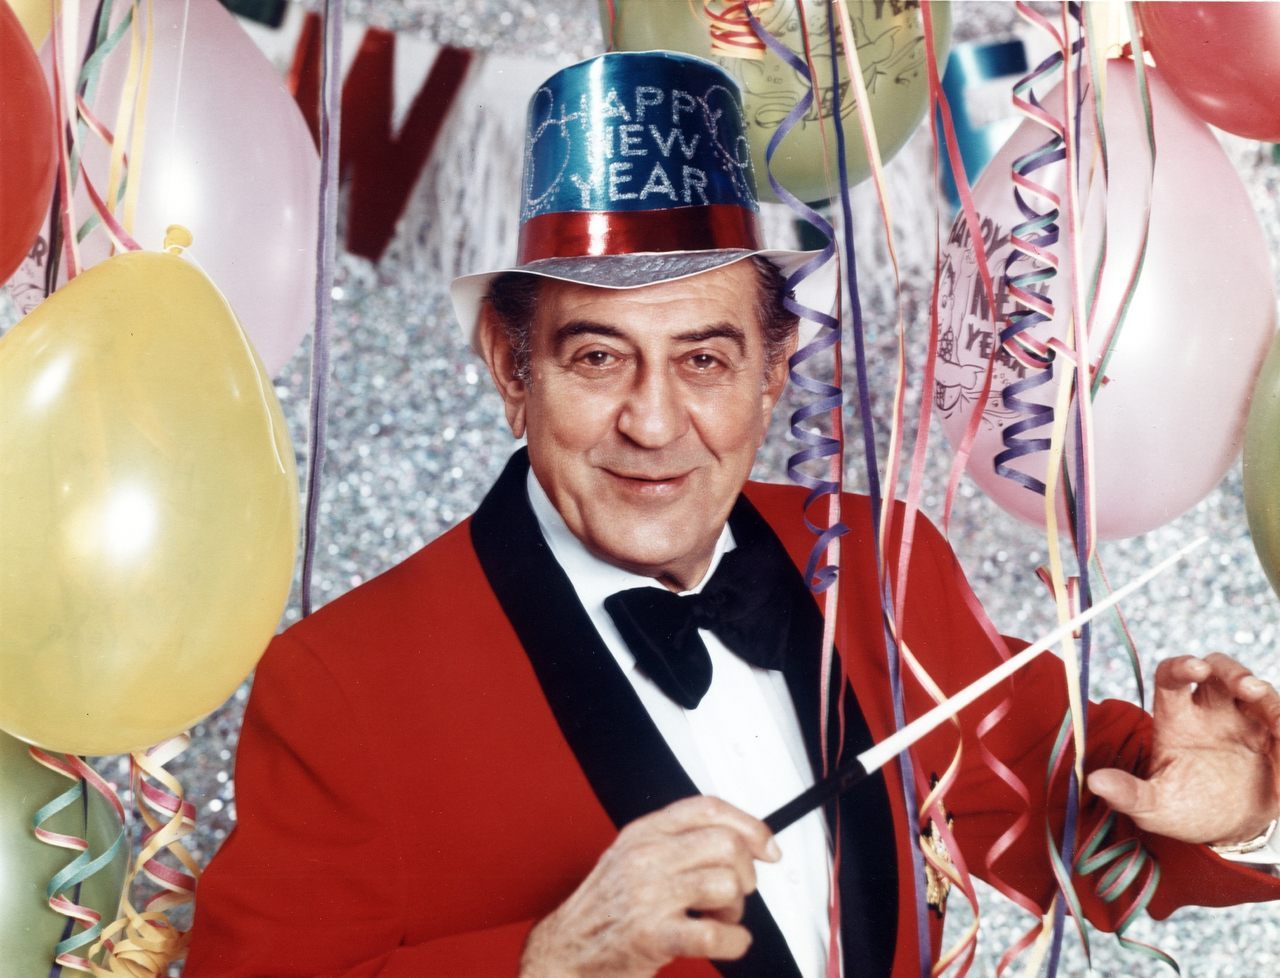 Guy Lombardo and the Royal Canadians played "Auld Lang Syne" at midnight on December 31 for almost a half a century. Lombardo became known as "Mr. New Year's Eve"—but the song always reminded him of Easter.